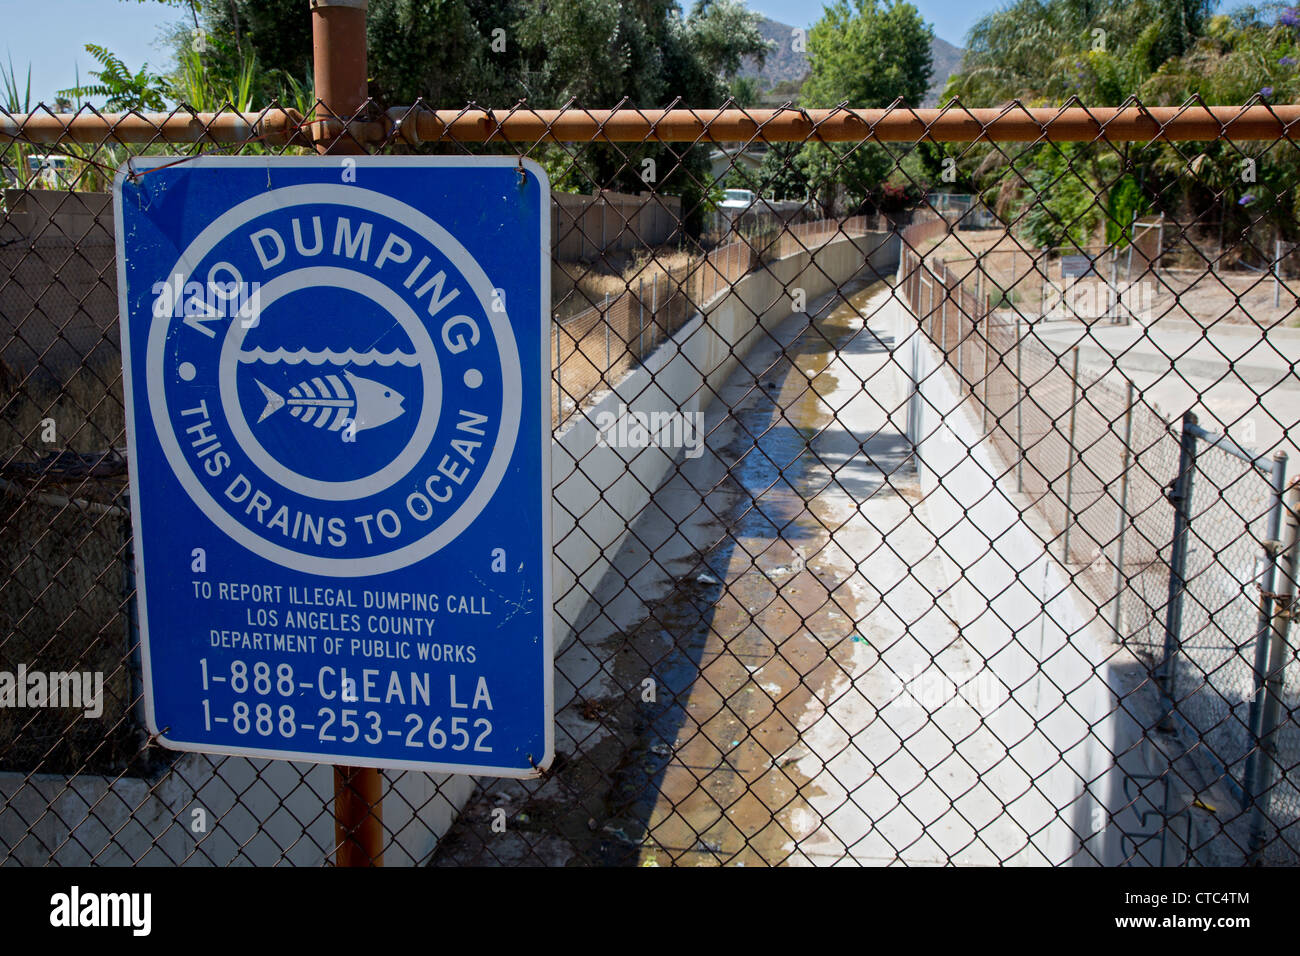 Sylmar, California - A sign warns against illegal dumping in a canal that drains storm water to the Pacific Ocean. Stock Photo